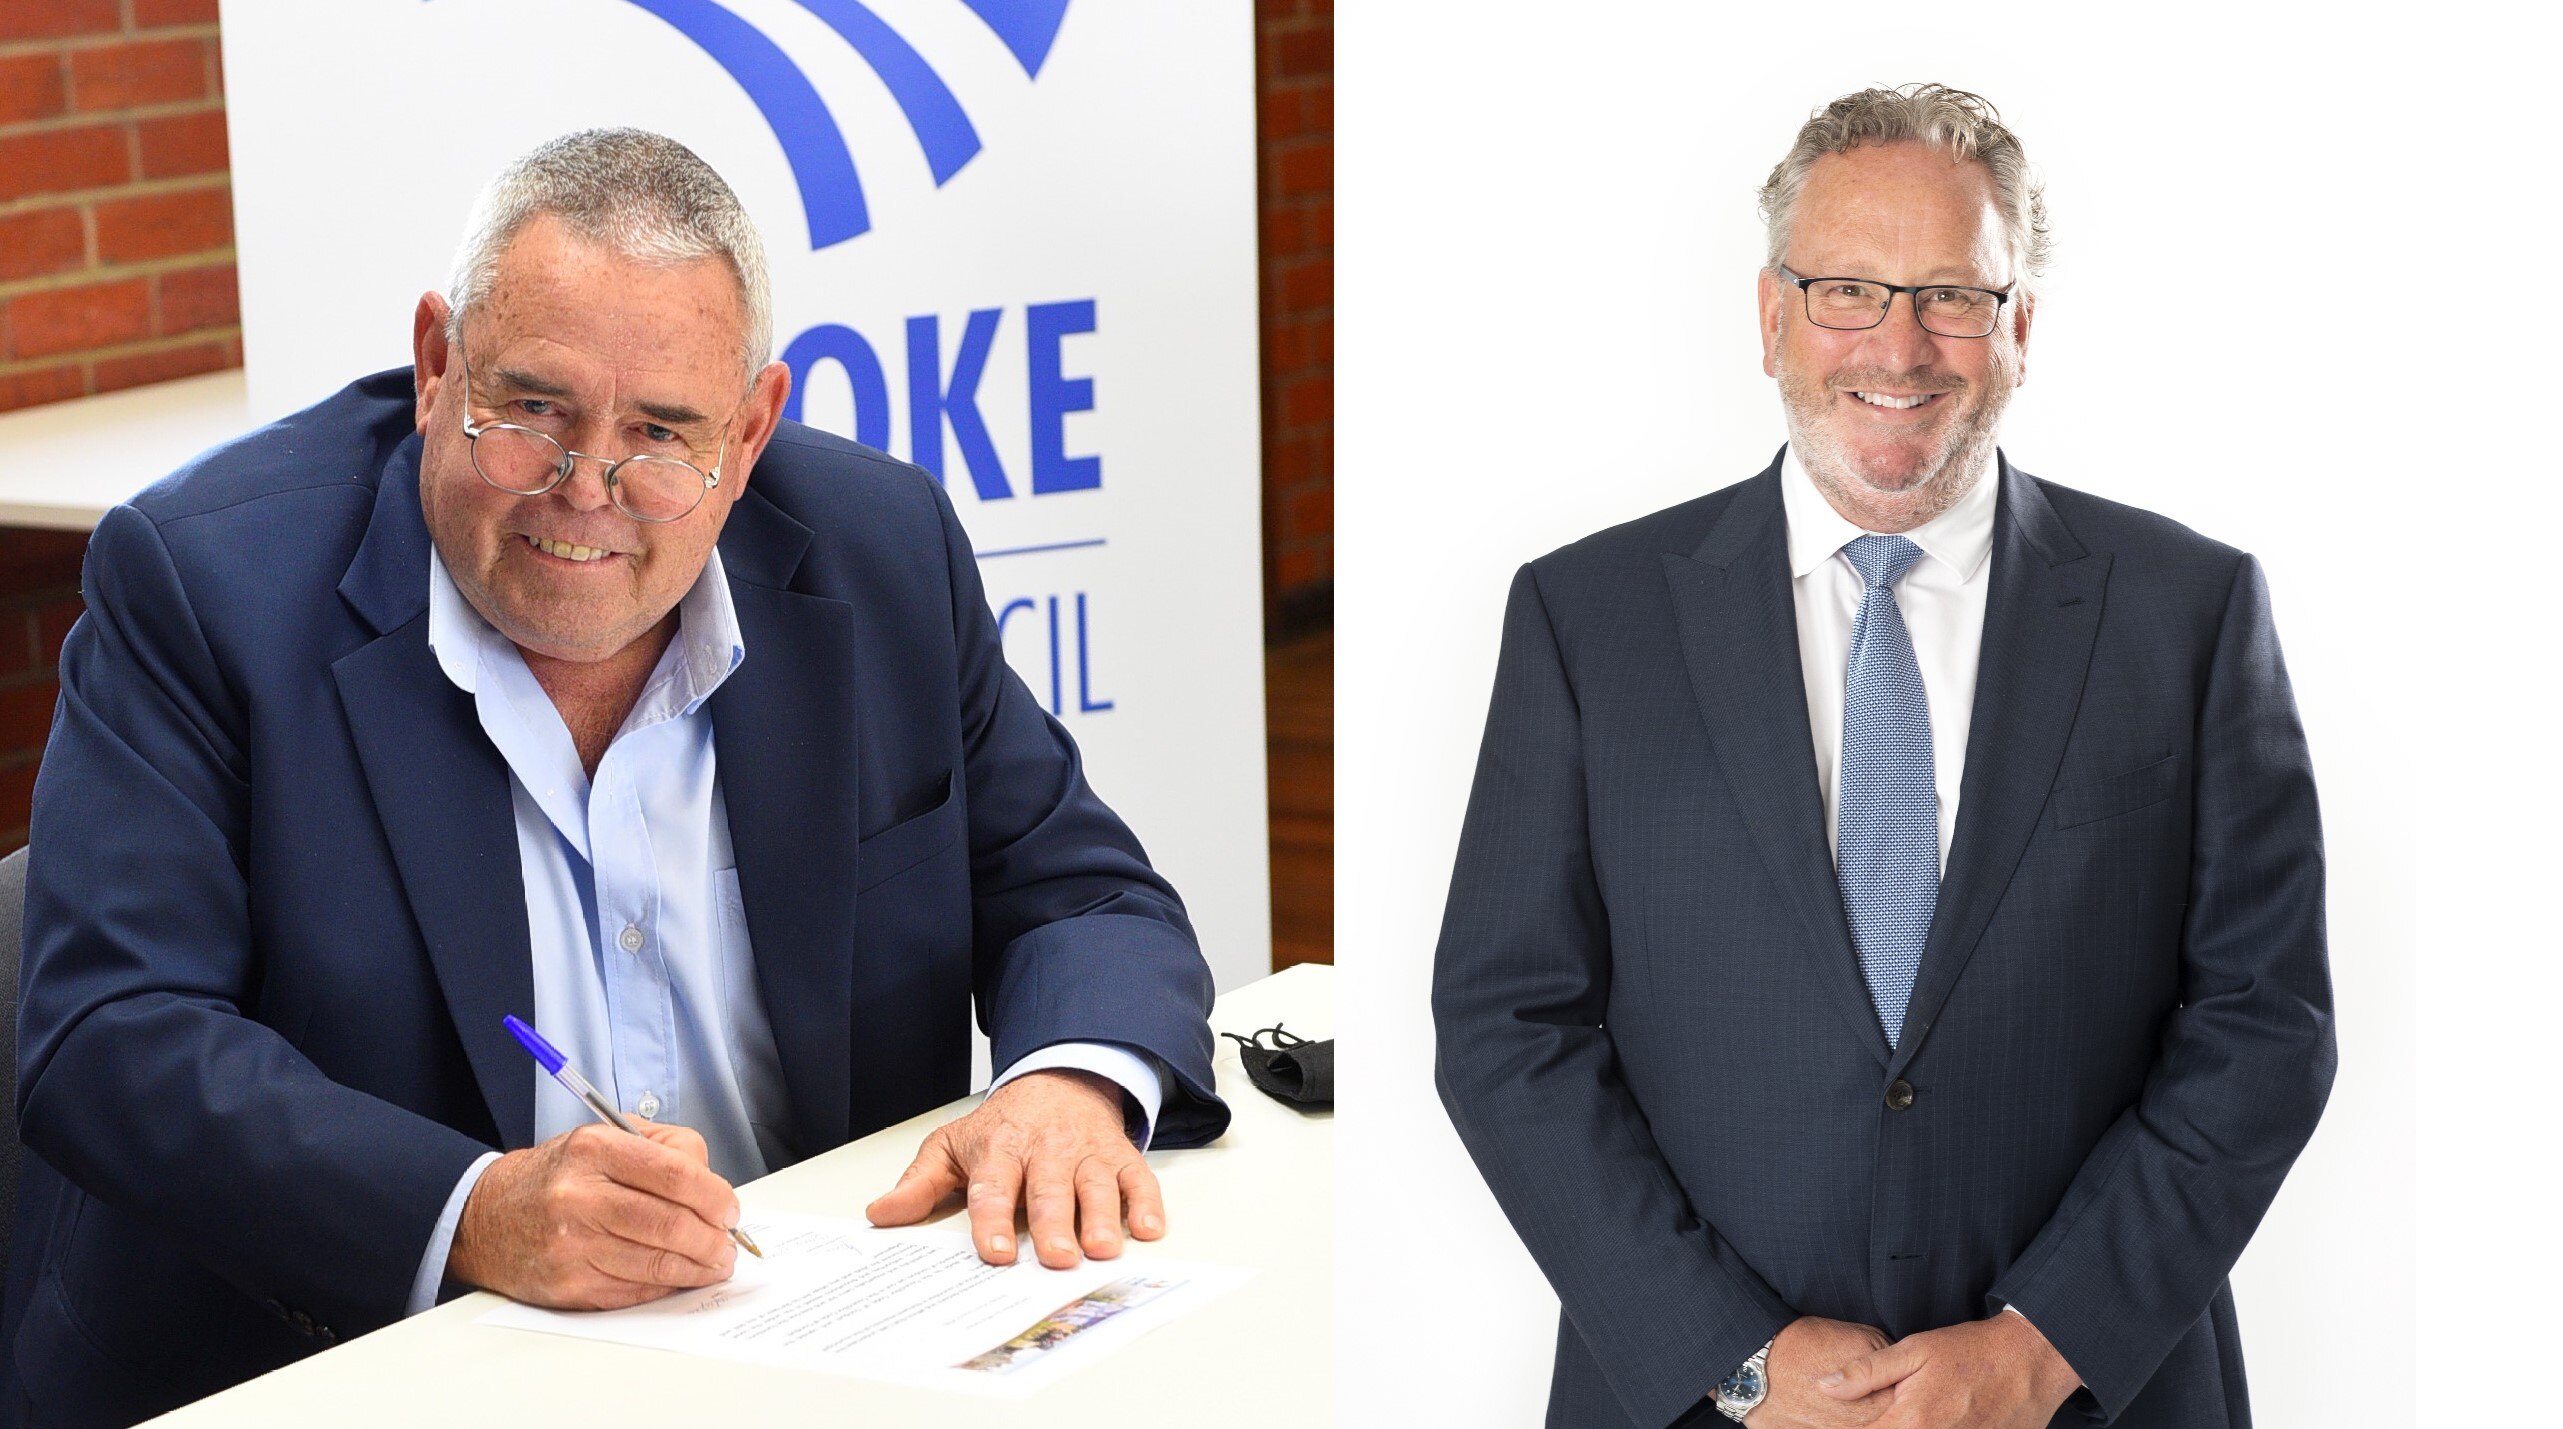 A composite image of two men in blue suits, one sitting signing a form, the other standing.